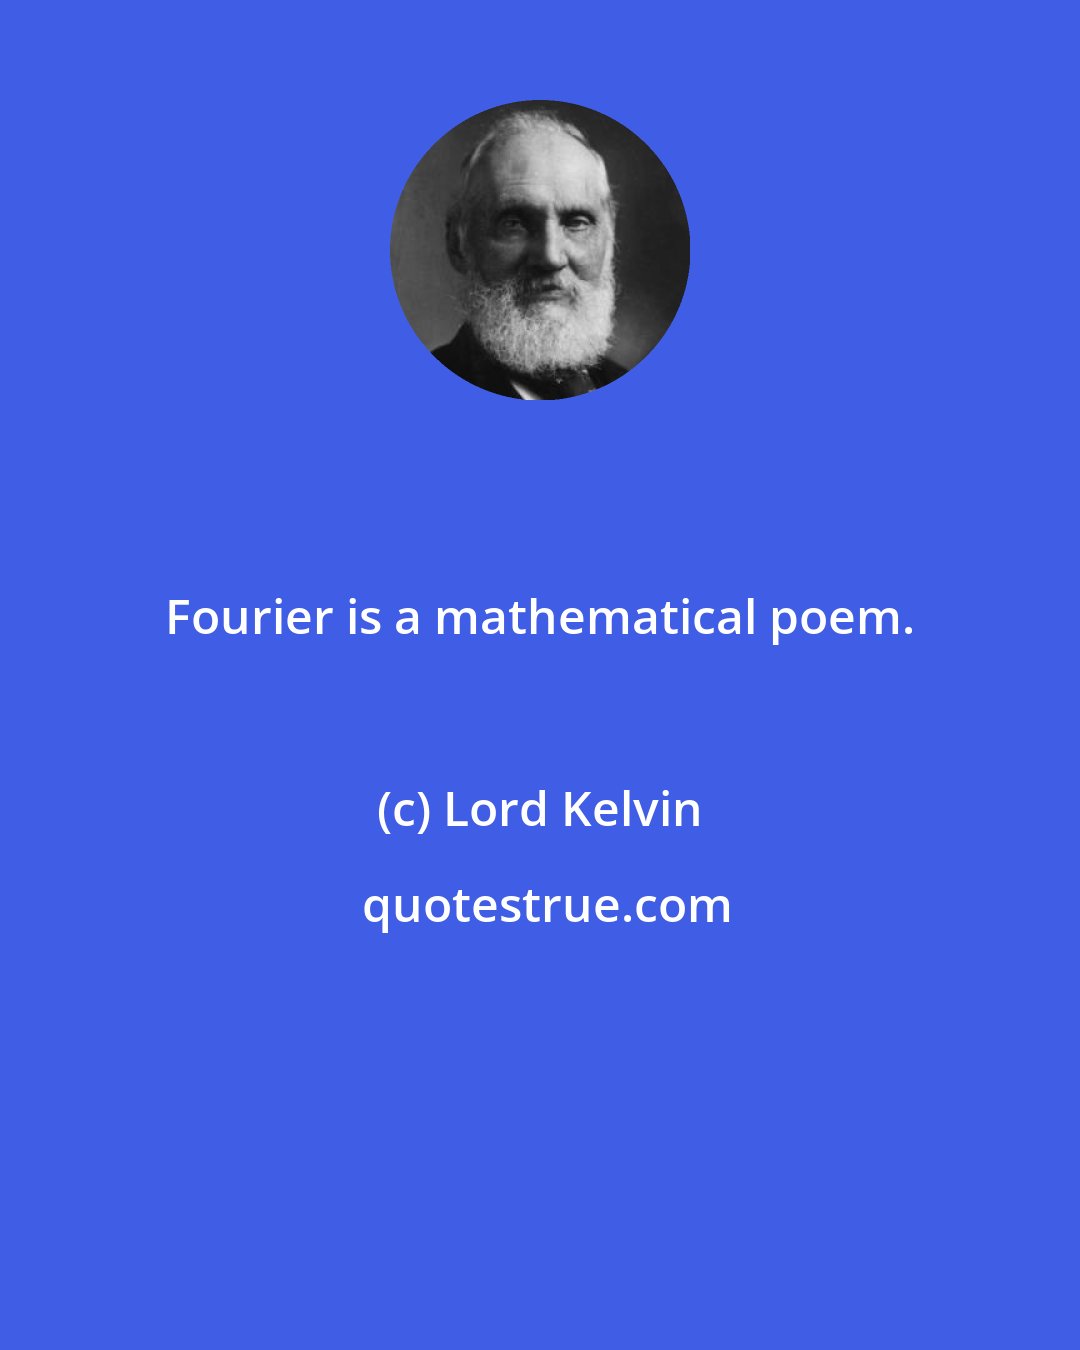 Lord Kelvin: Fourier is a mathematical poem.